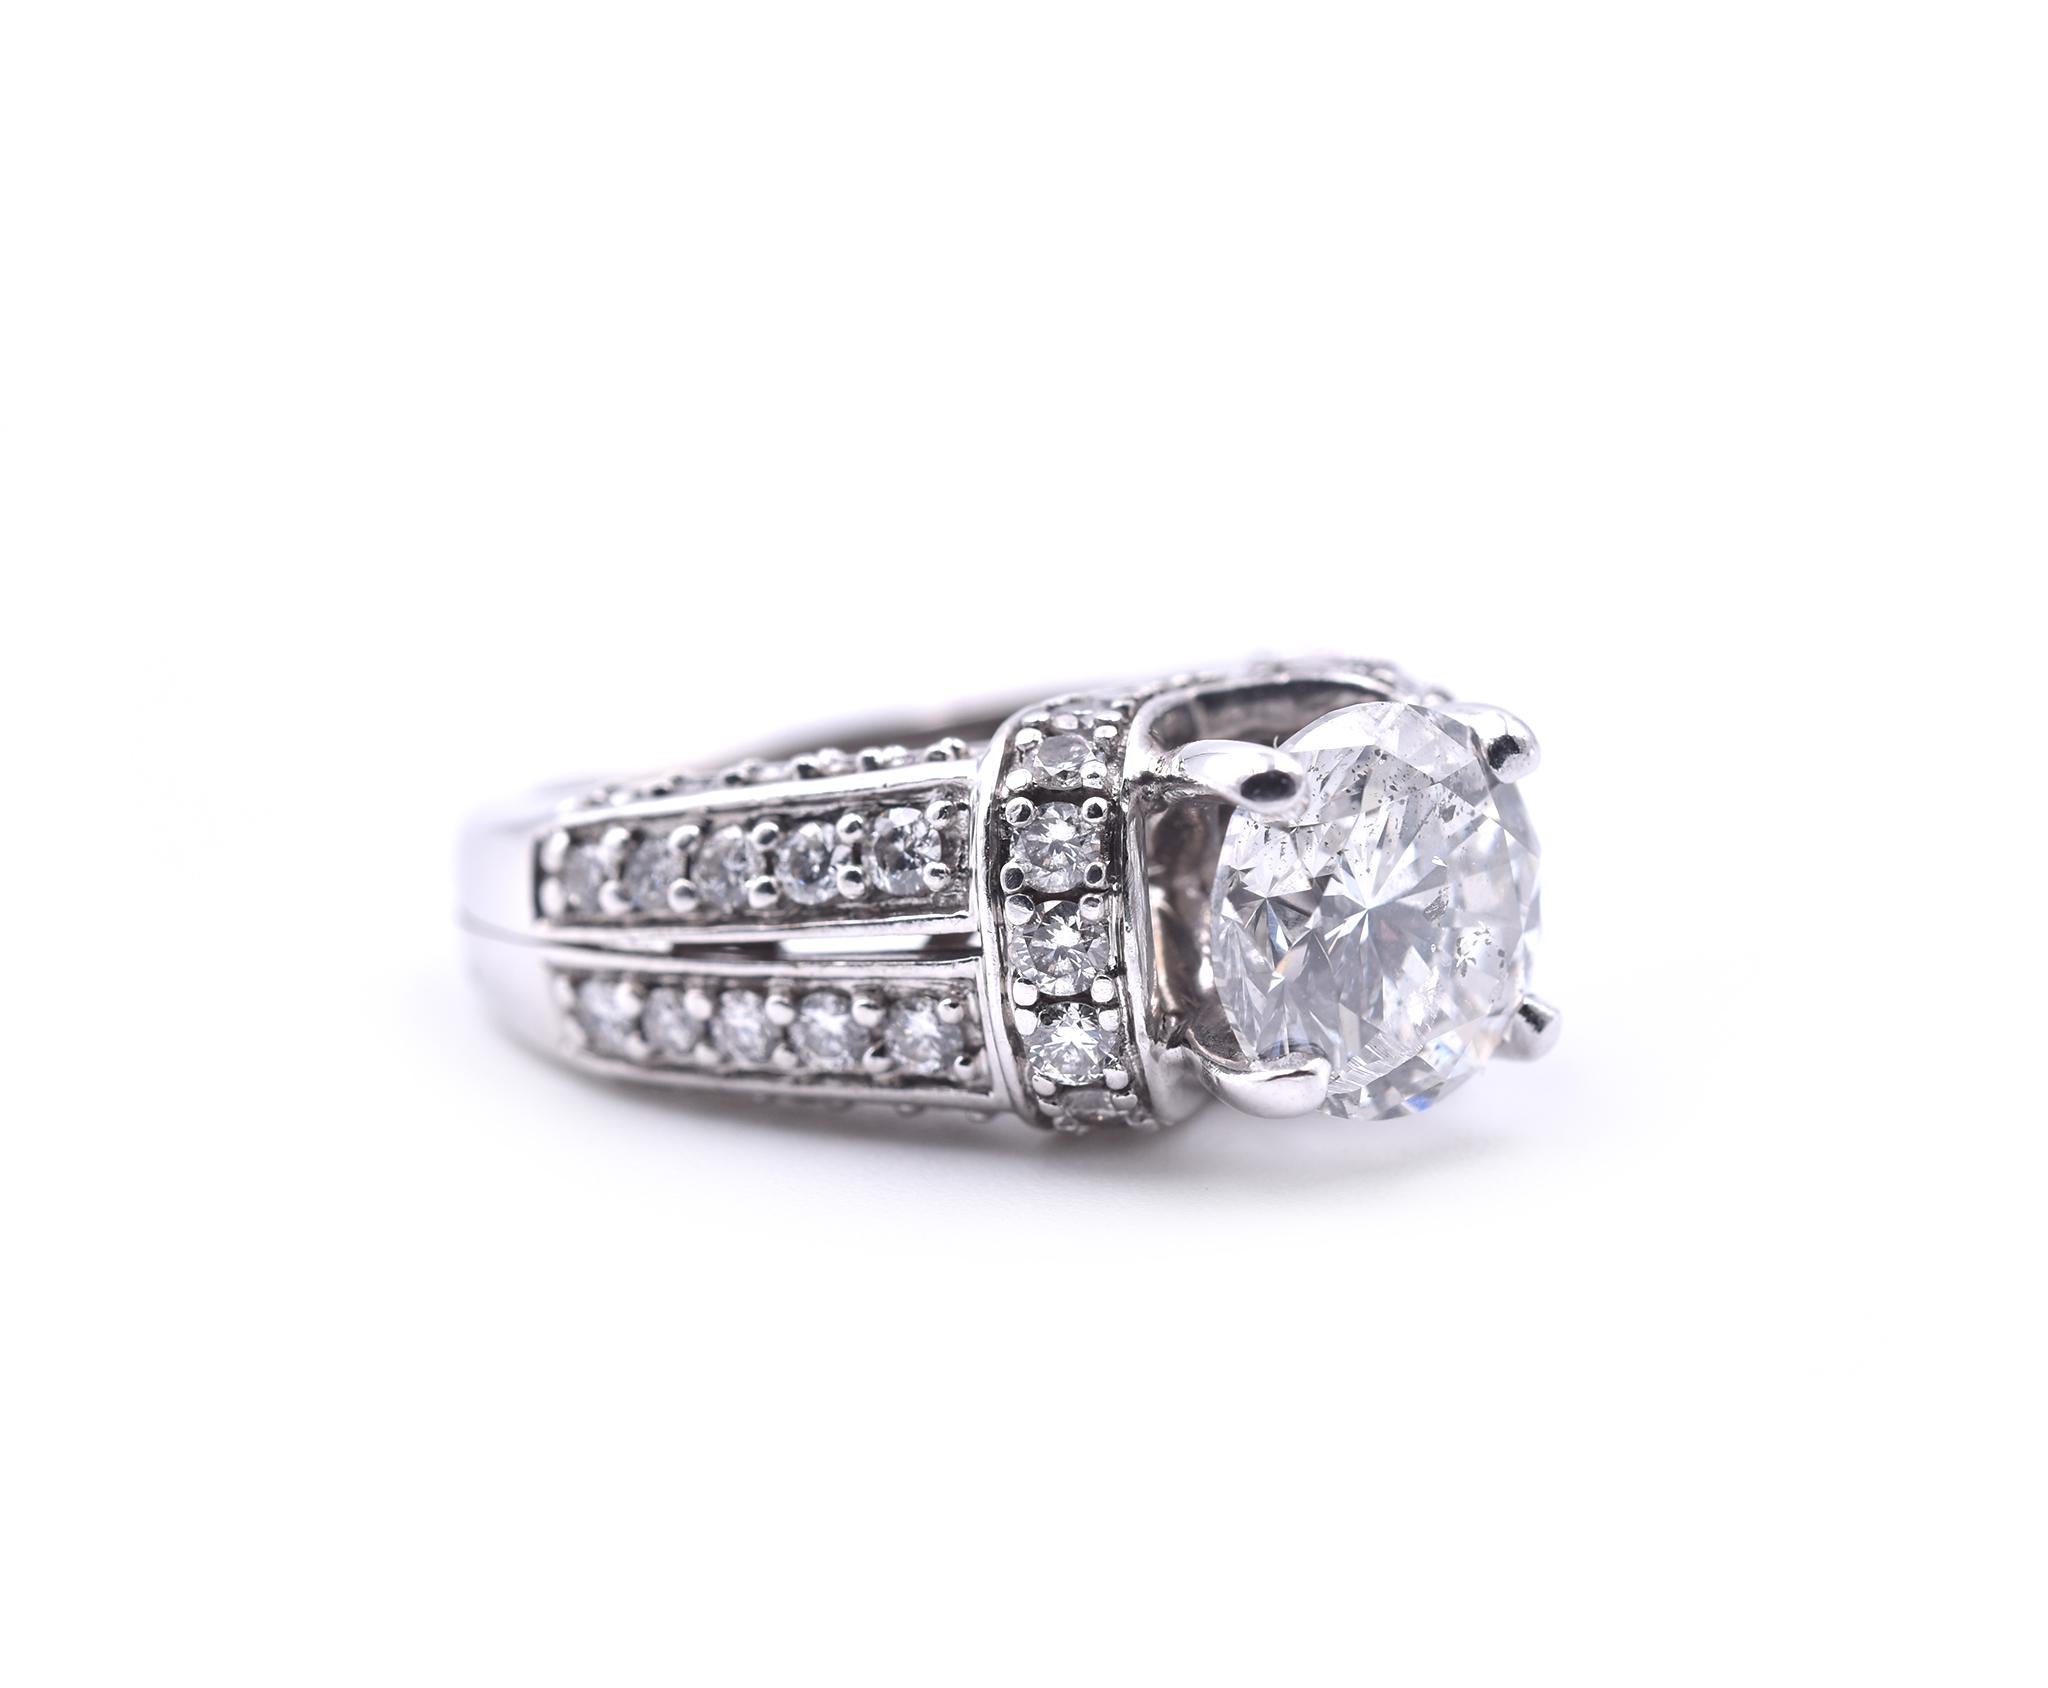 Designer: custom 
Material: 14k white gold
Center Diamond: 1 Round Brilliant Cut = 2.10ct
Color: H
Clarity: I1
Diamonds: 60 Round Brilliant Cuts = 1.00cttw H SI1
Ring Size: 4.75 (please allow two additional shipping days for sizing